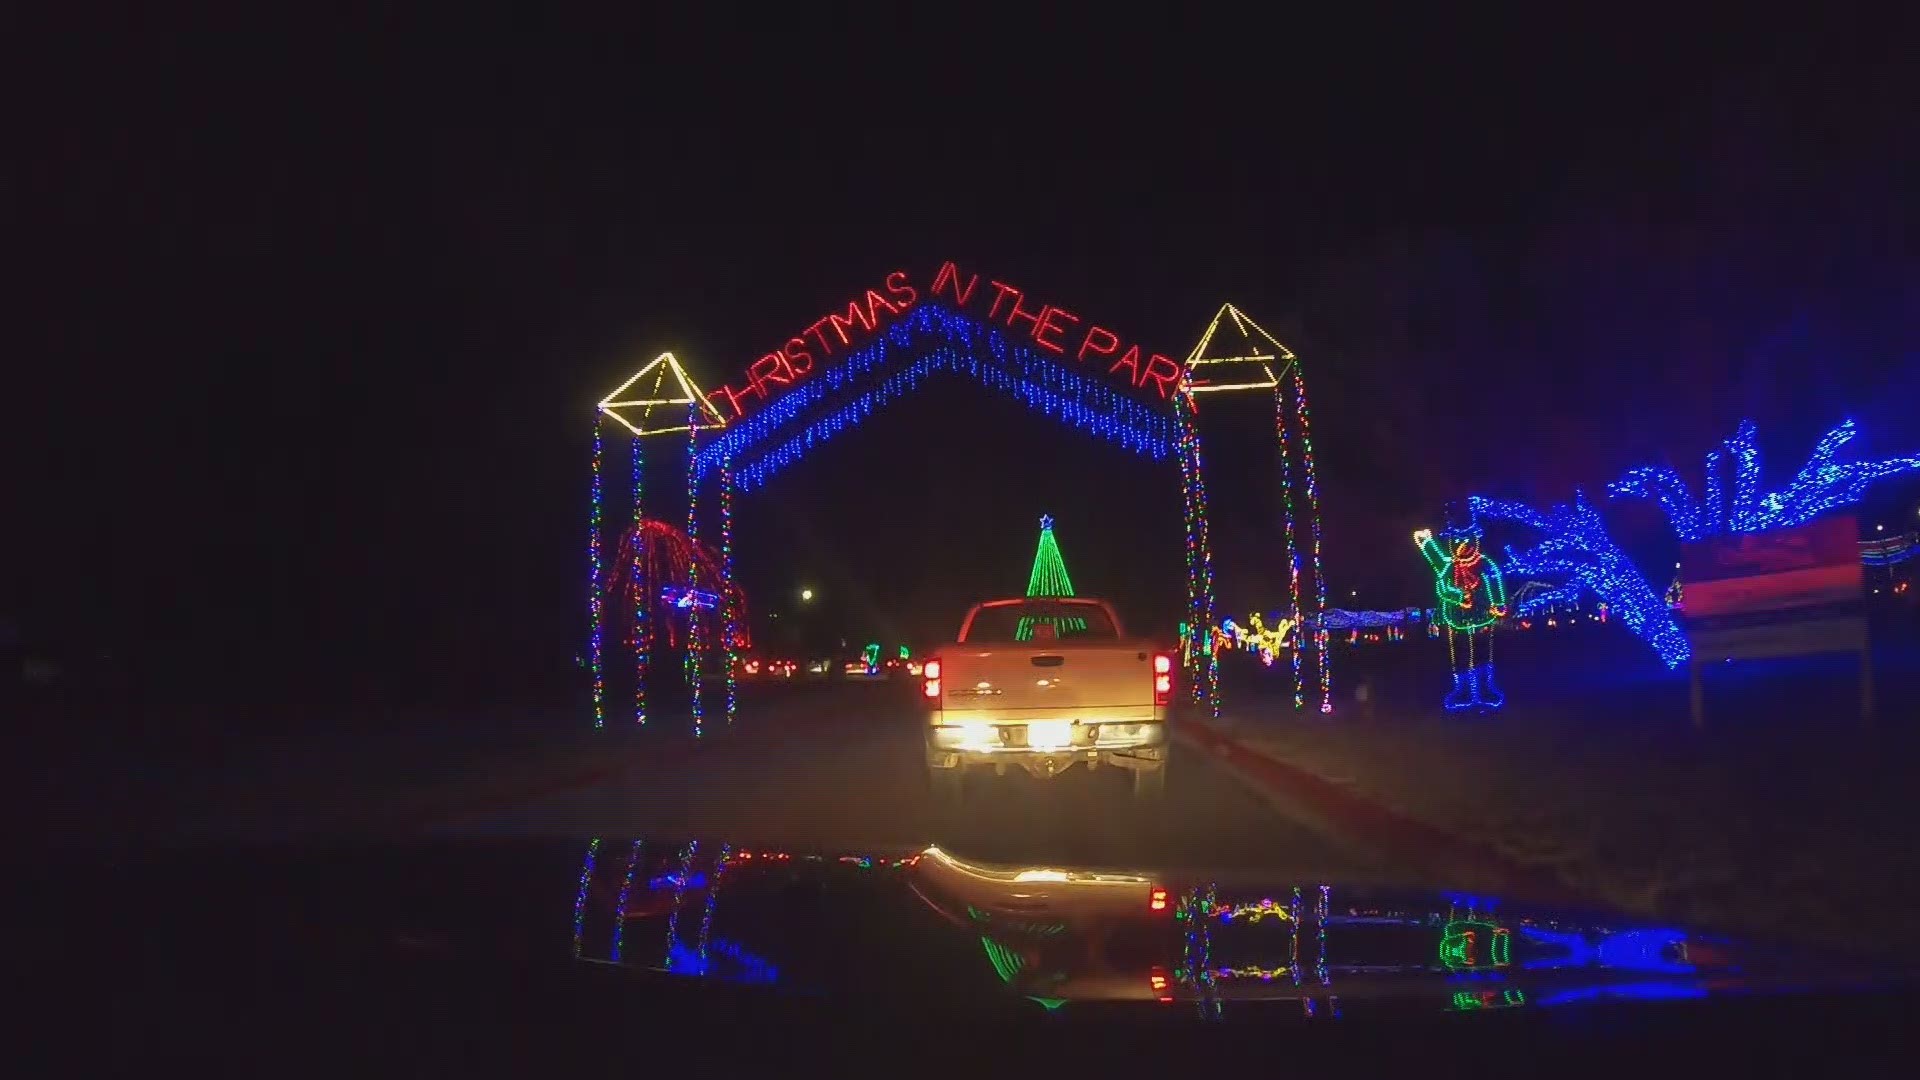 The City of College Station has decorated Stephen C. Beachy Central Park with more than a million lights for people to drive by and enjoy Dec. 4 - 5 from 6 - 11 pm.